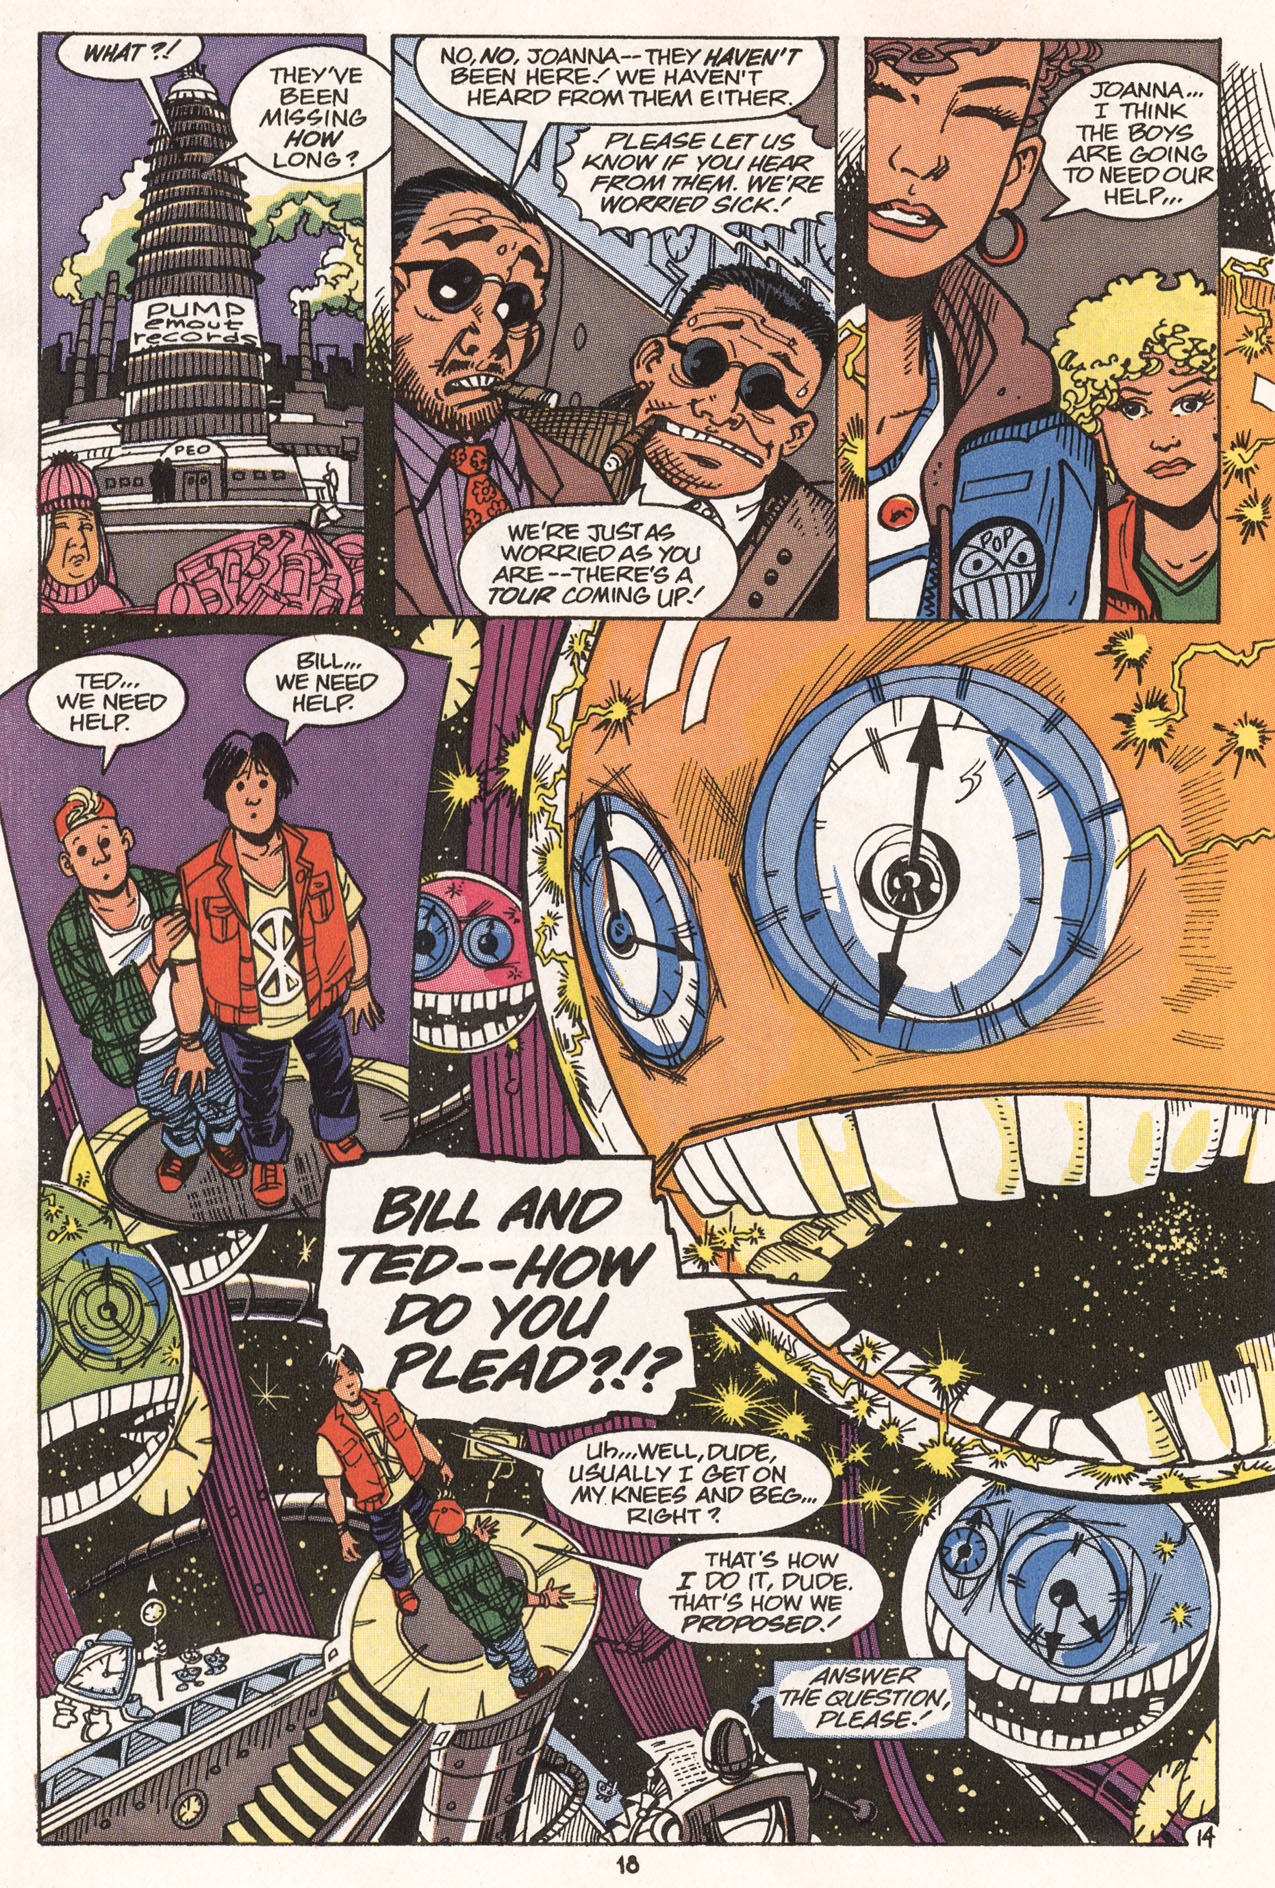 Read online Bill & Ted's Excellent Comic Book comic -  Issue #6 - 19